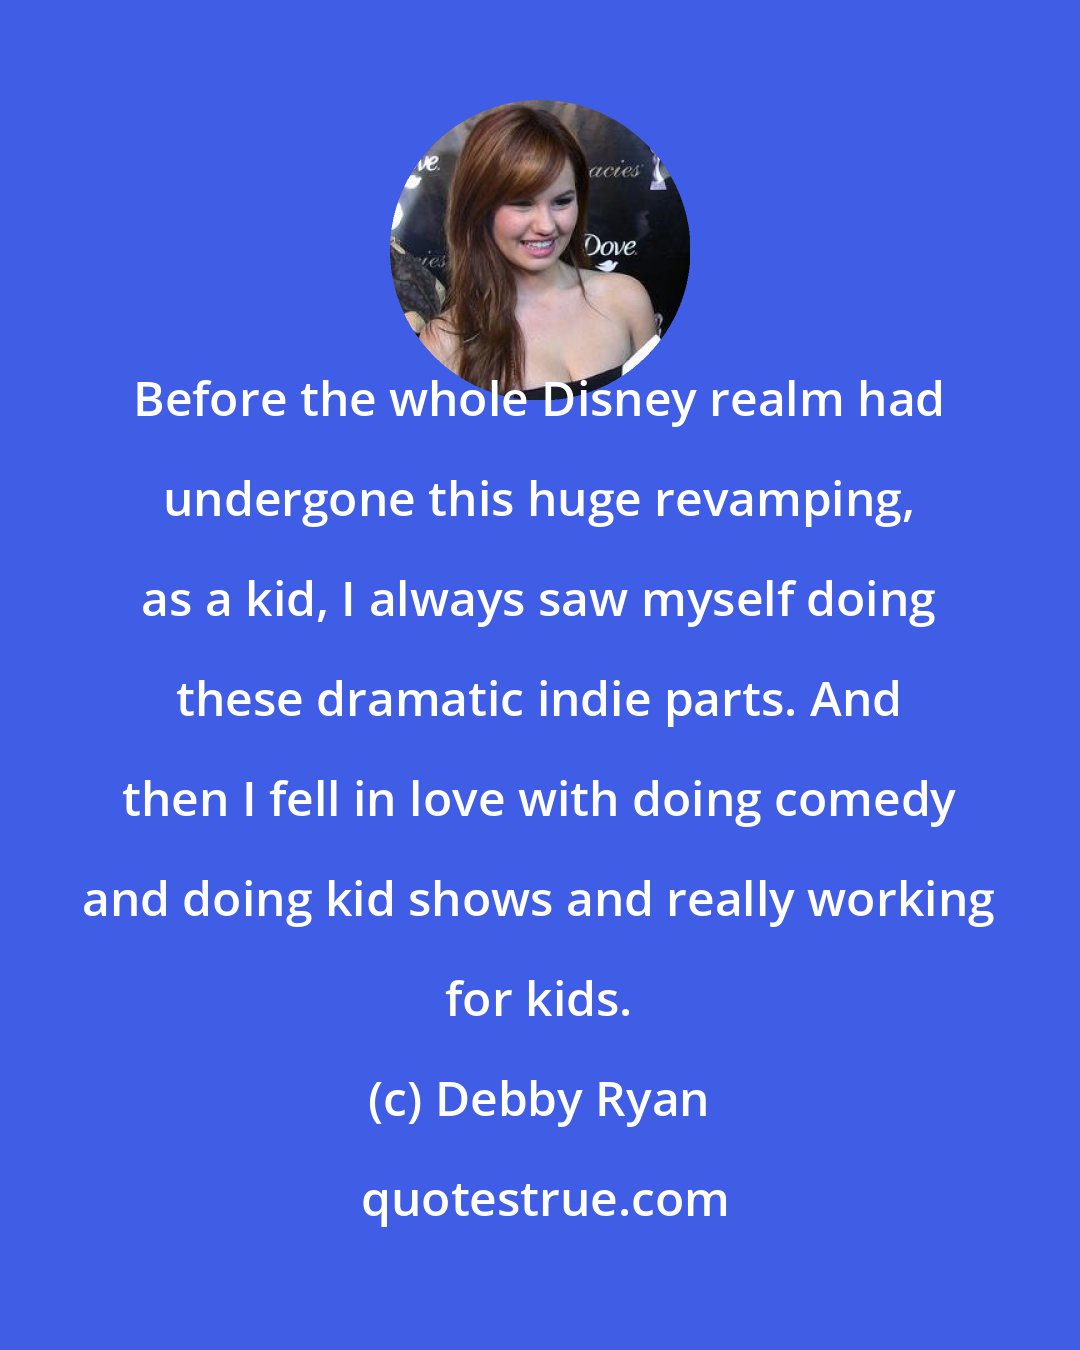 Debby Ryan: Before the whole Disney realm had undergone this huge revamping, as a kid, I always saw myself doing these dramatic indie parts. And then I fell in love with doing comedy and doing kid shows and really working for kids.